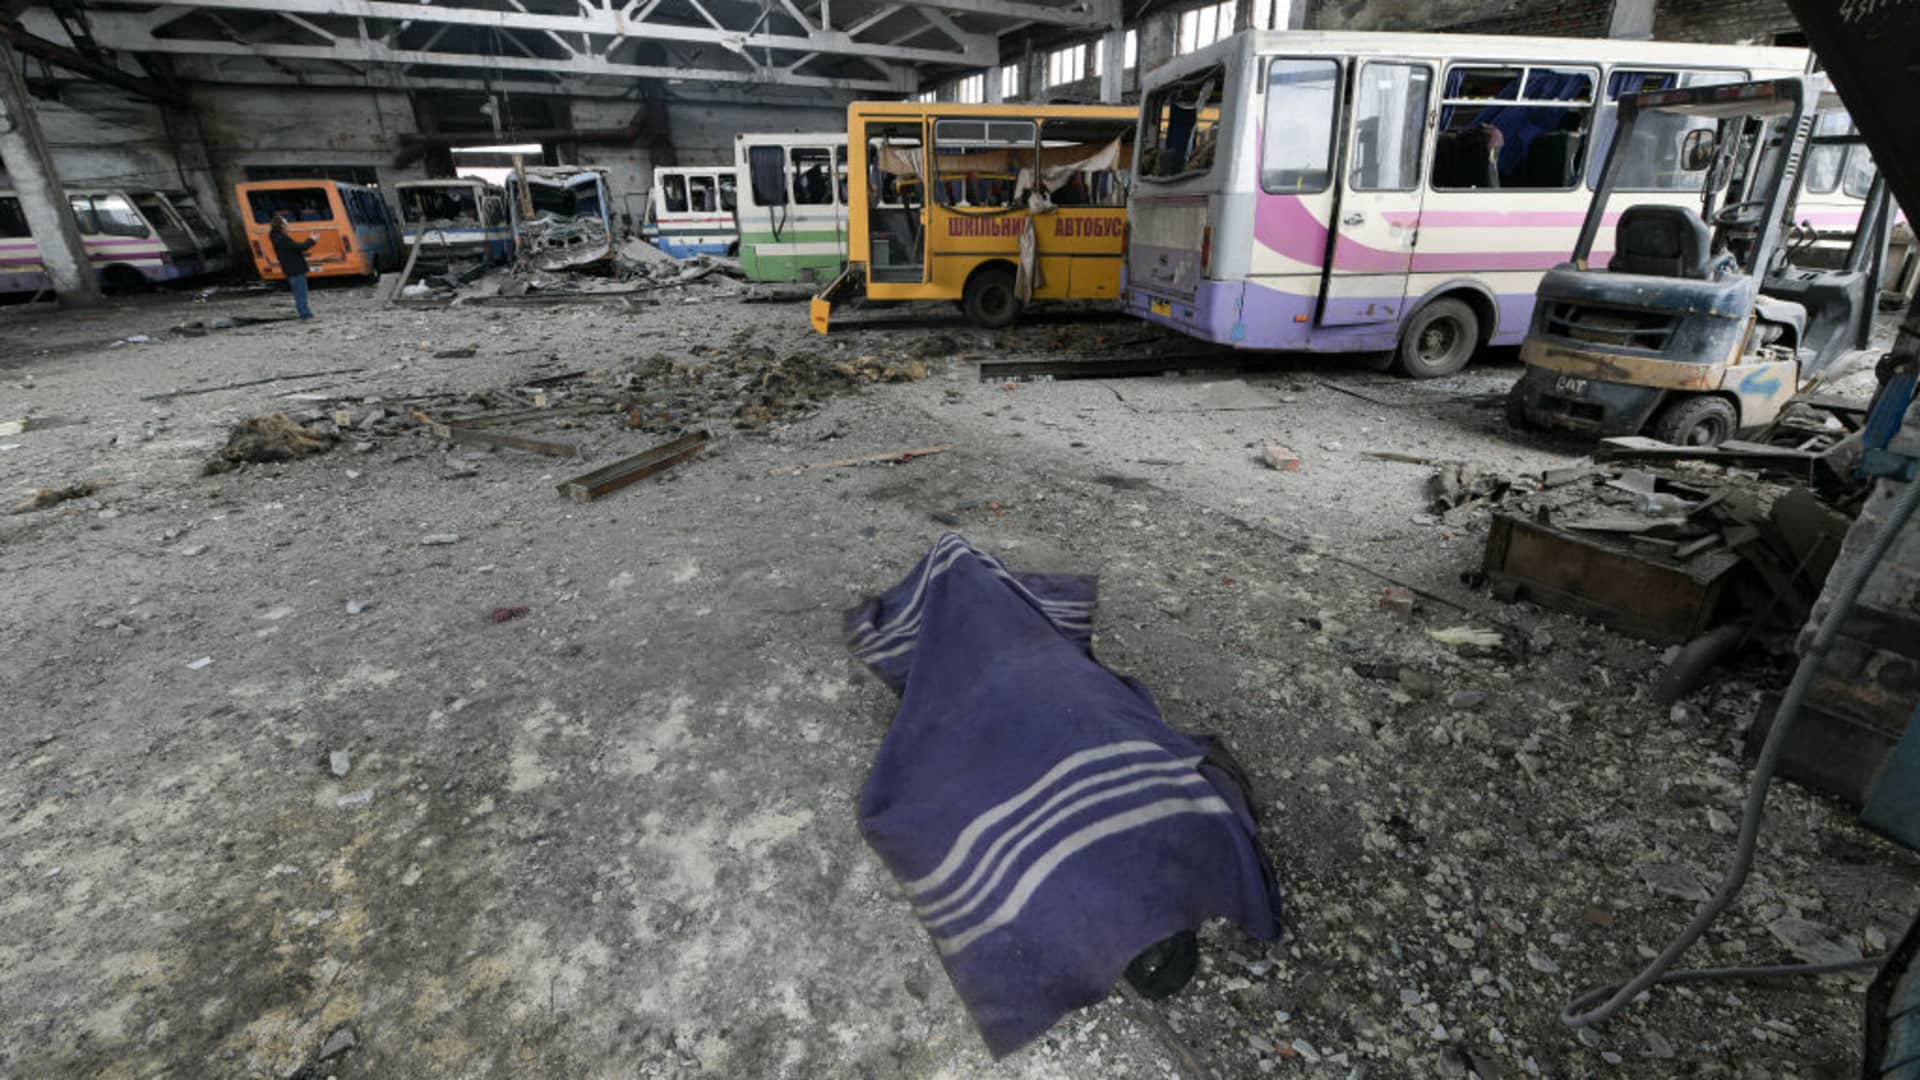 A body lays on the ground at bus depot after an artillery attack as one killed and another wounded in Volnovakha on the Russian-controlled territory on March 09, 2023.